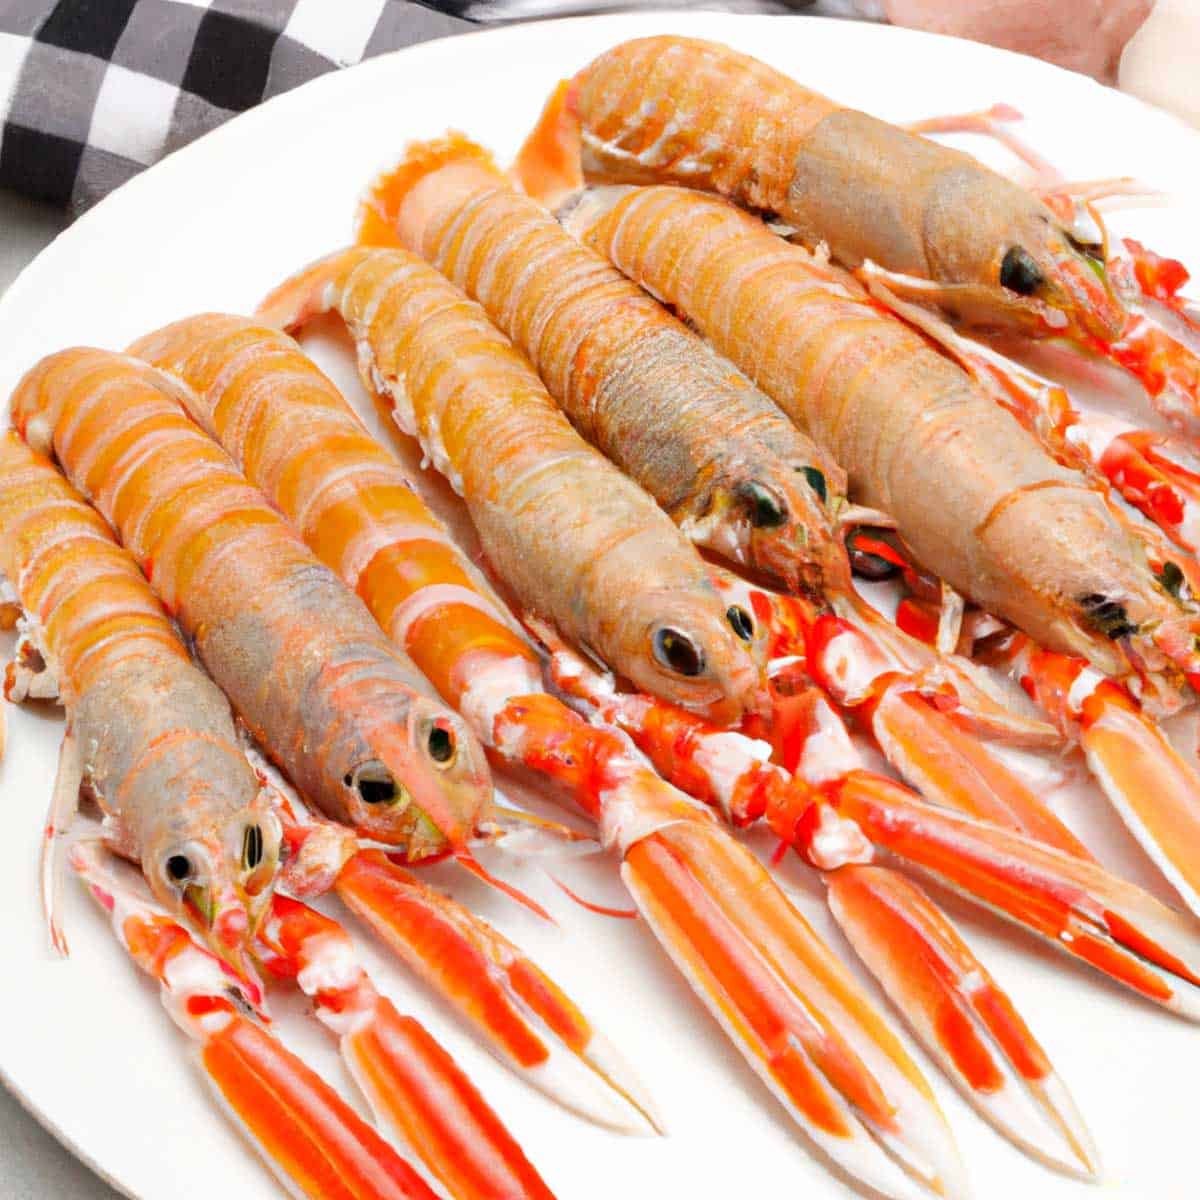 Raw langoustines on a white plate.